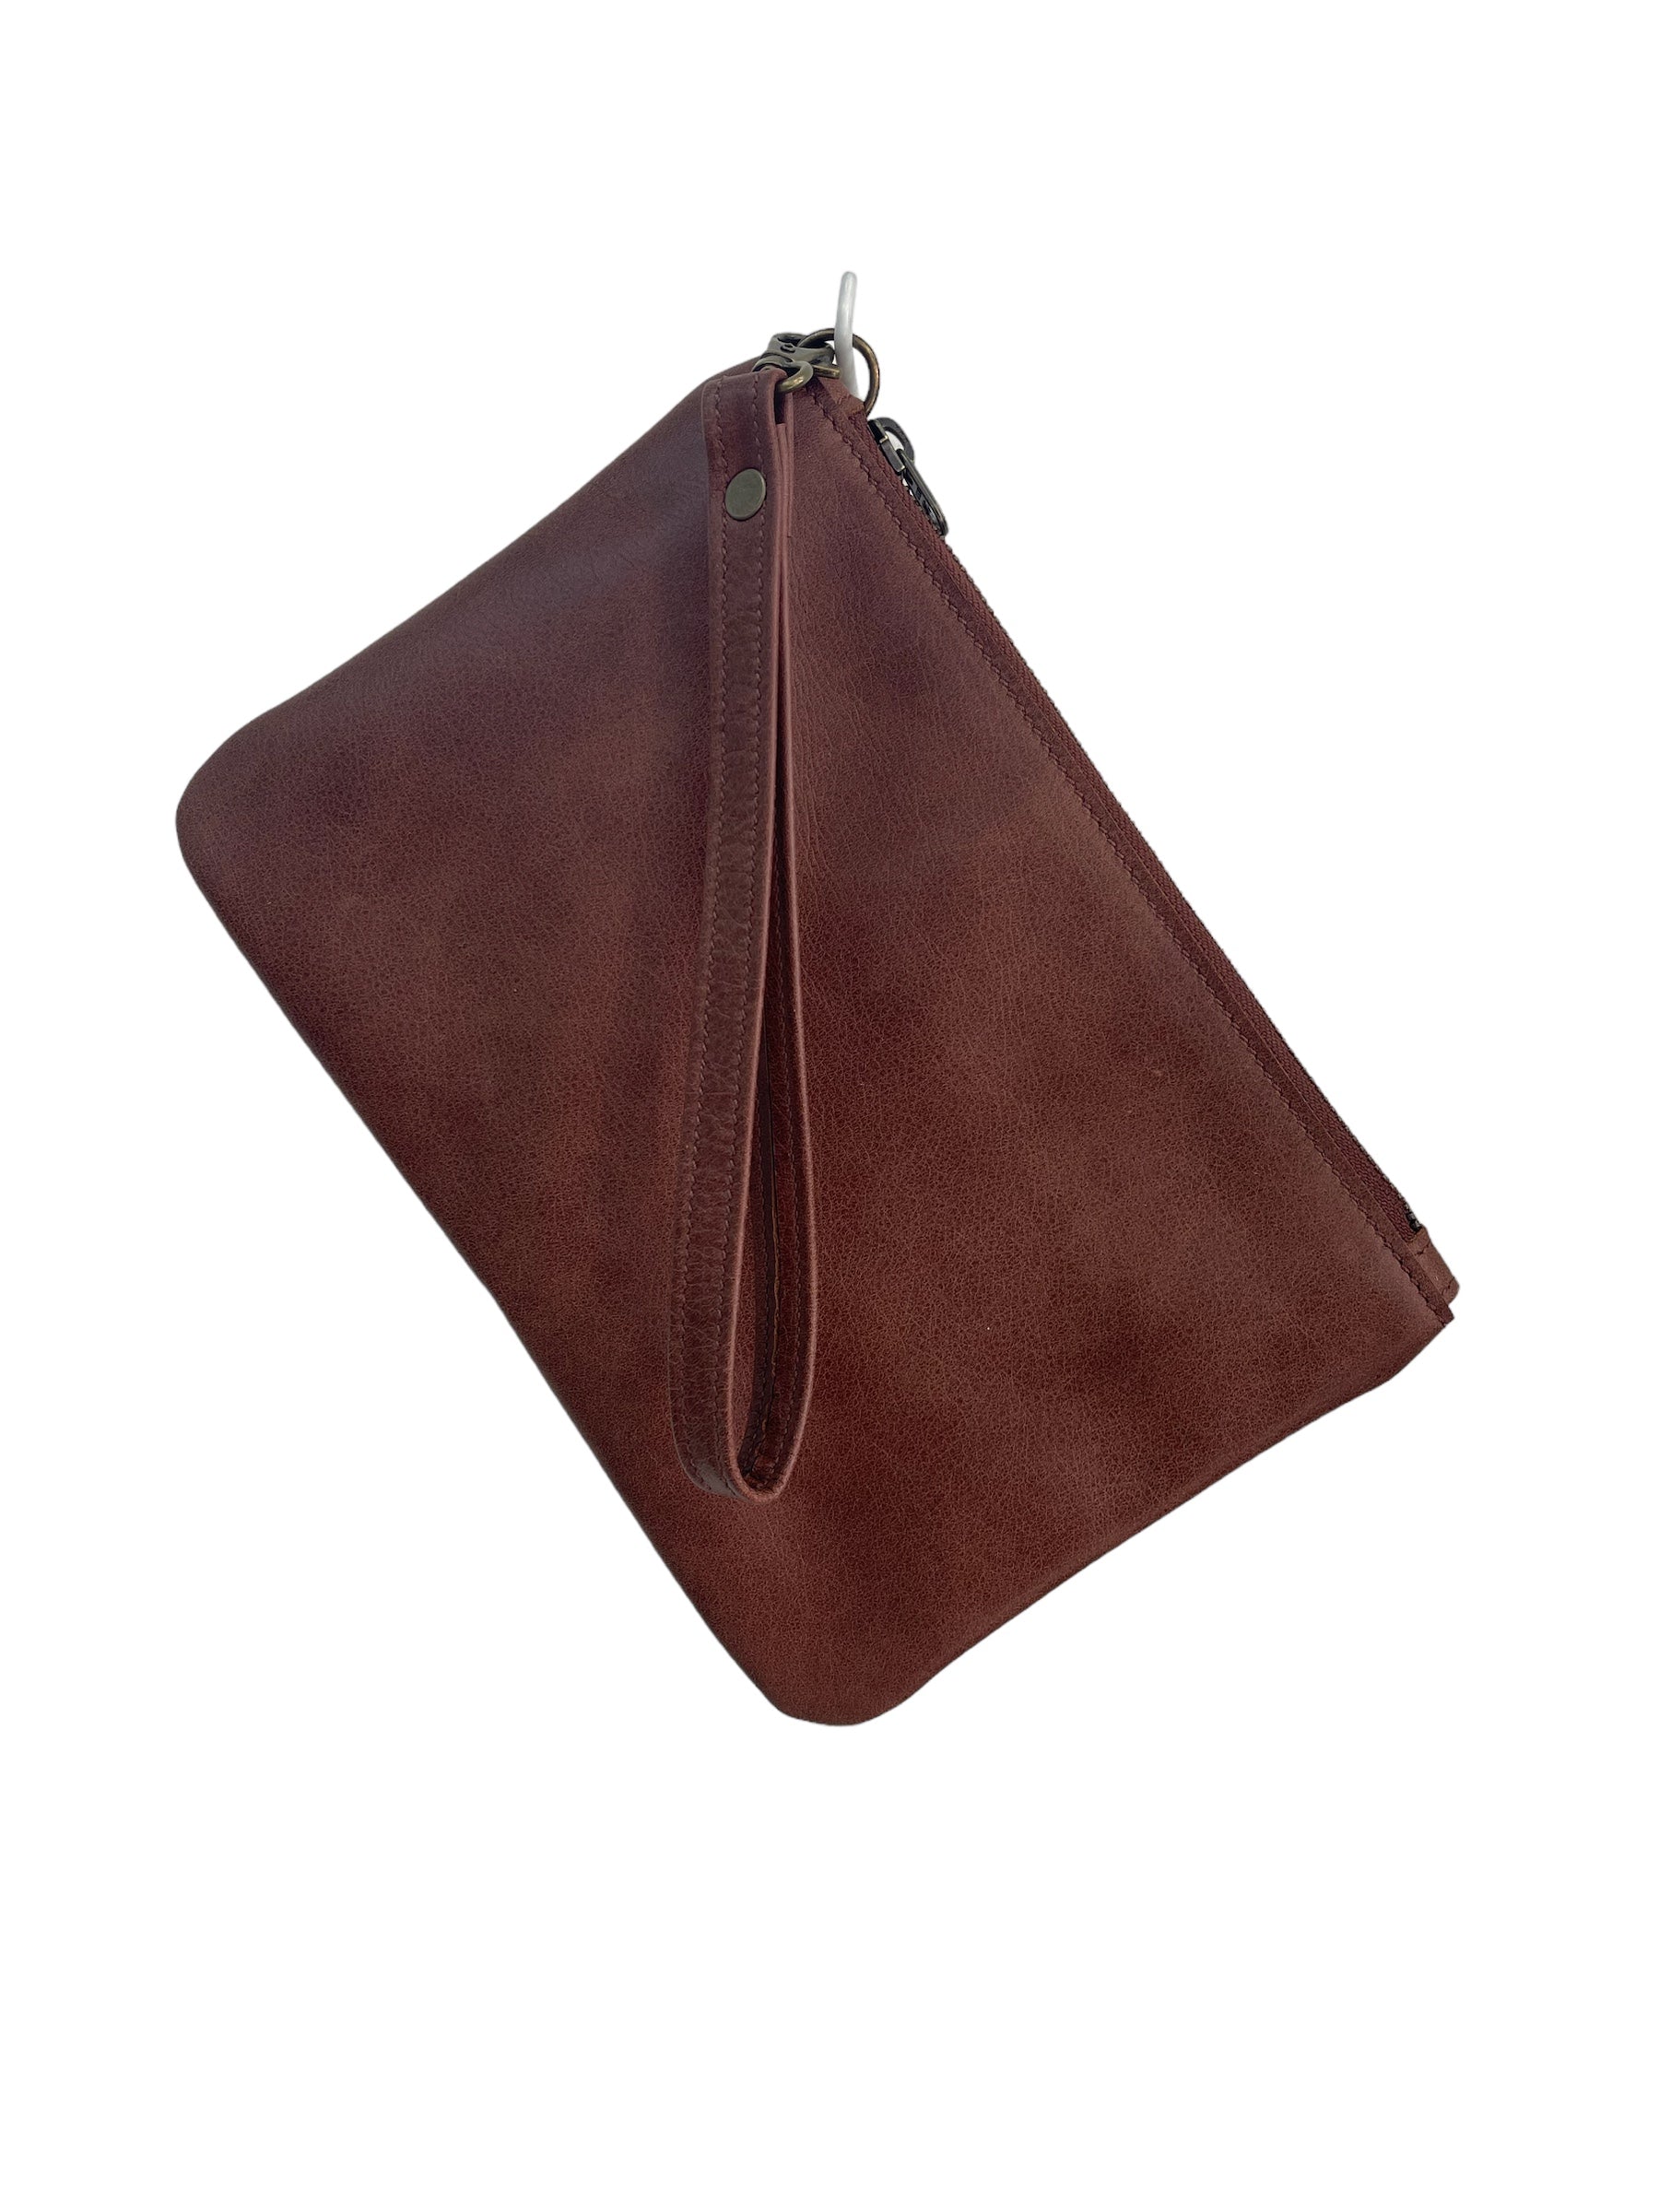 New Andover Clutch Copper Leather #88